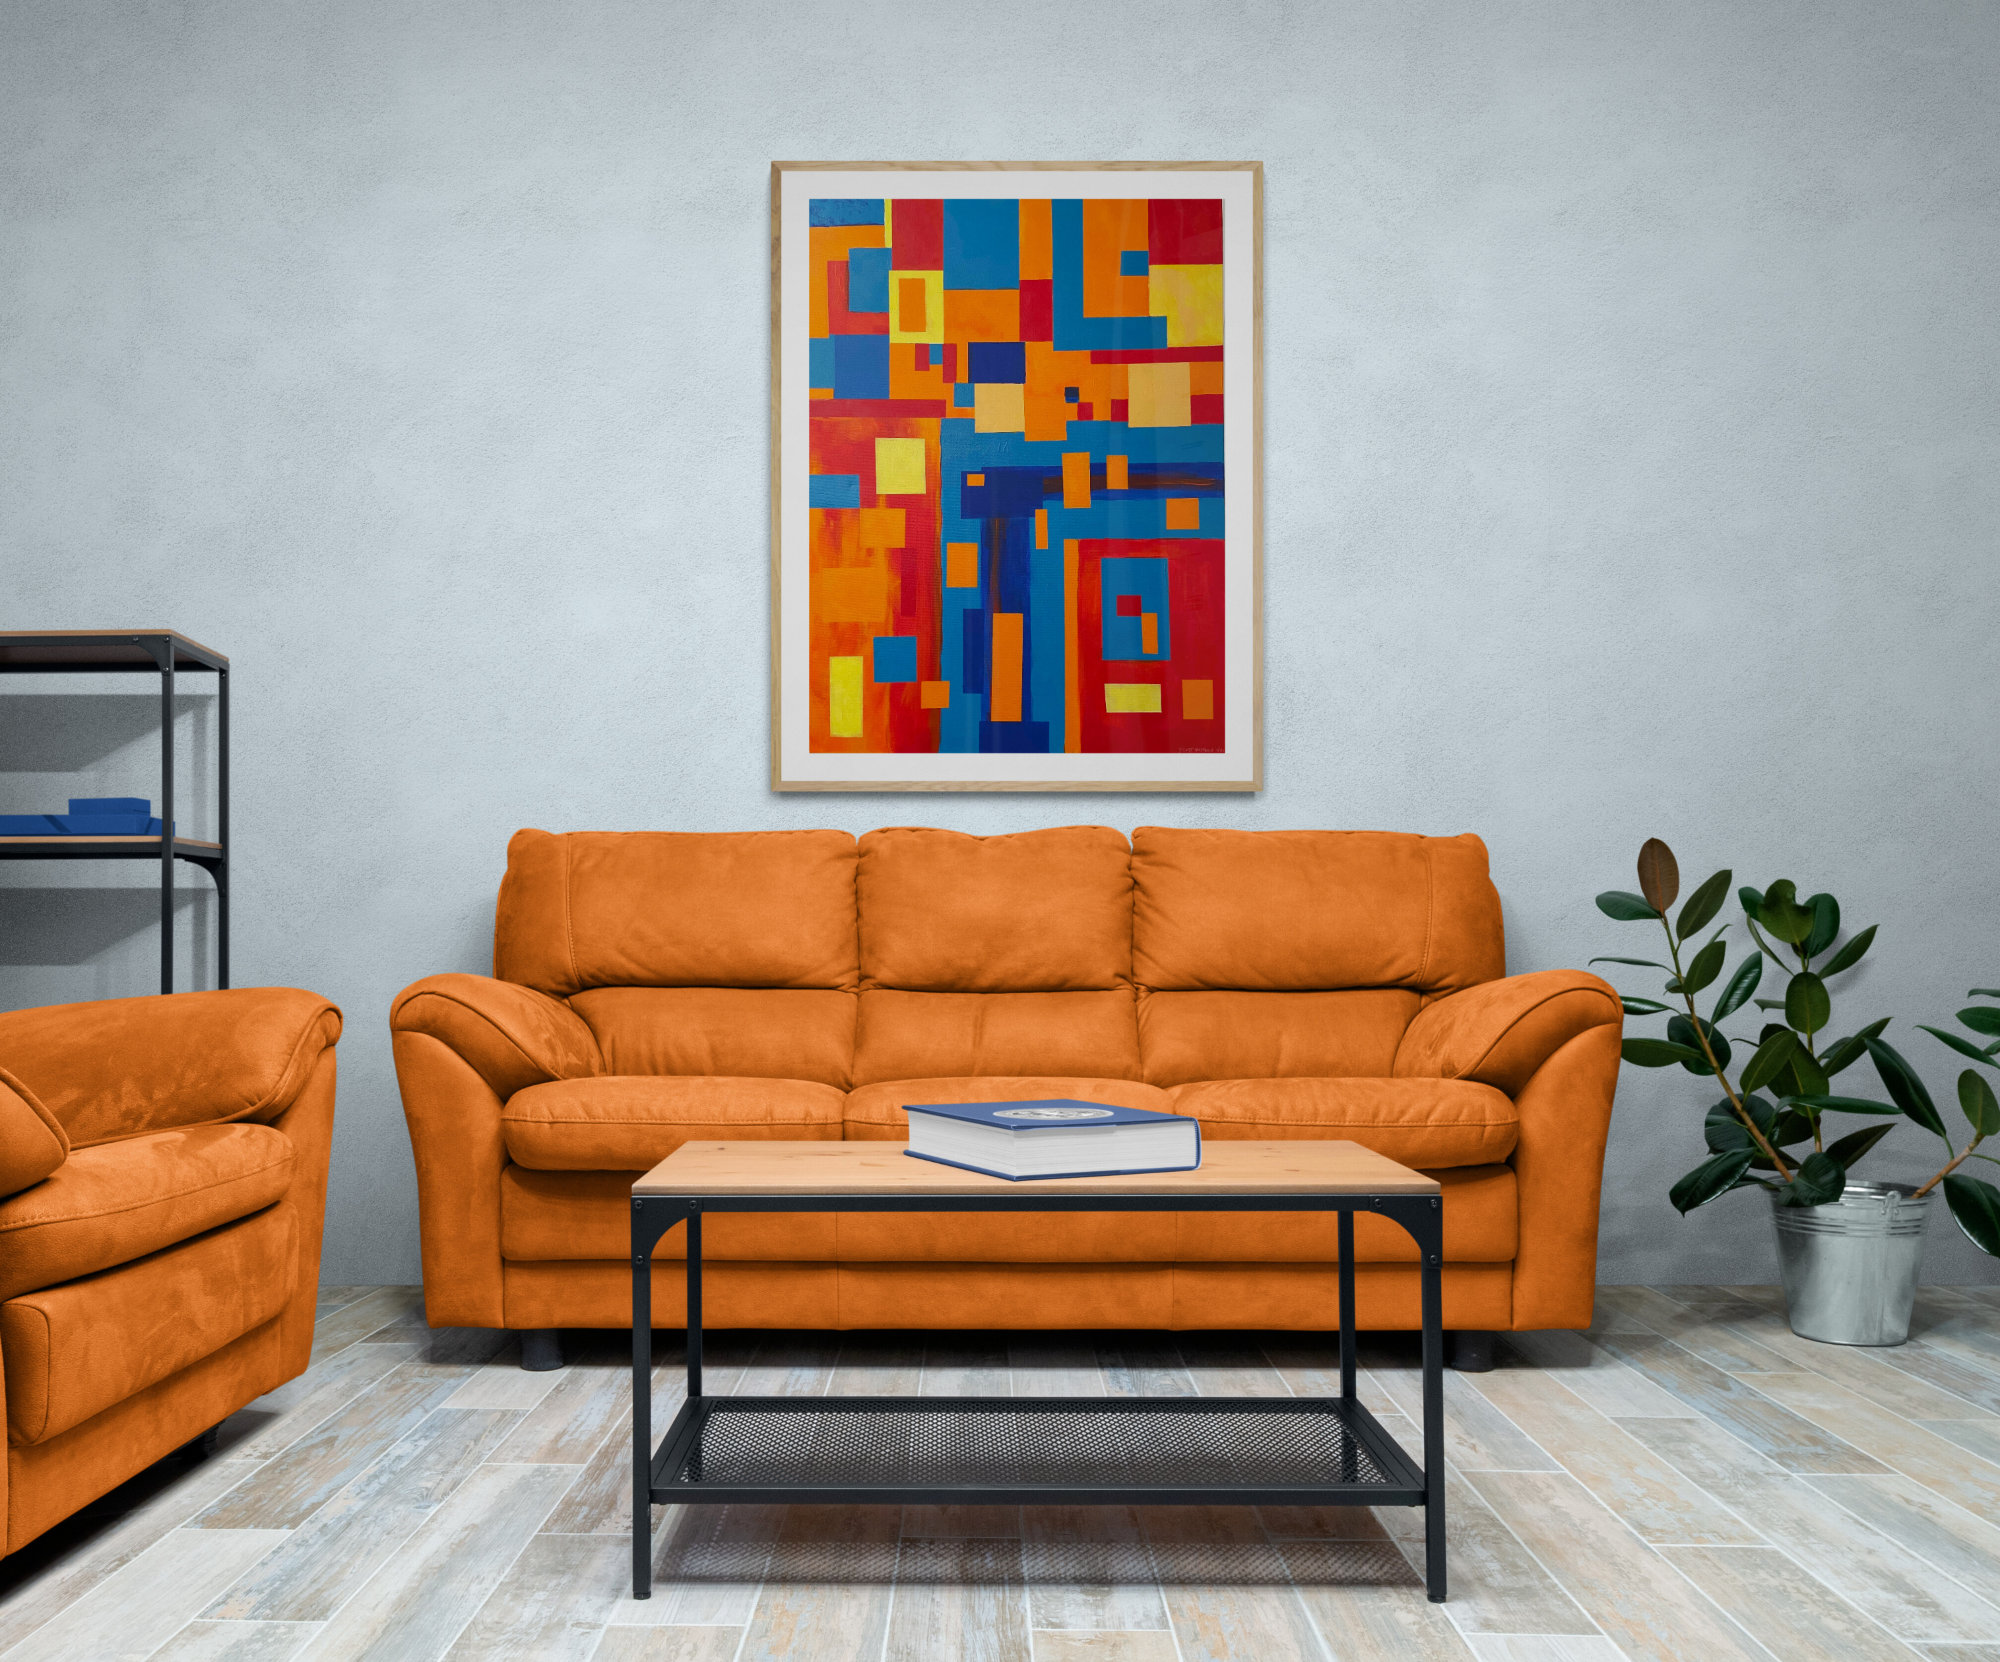 Abstract acrylic painting Leaning Slightly in a living room